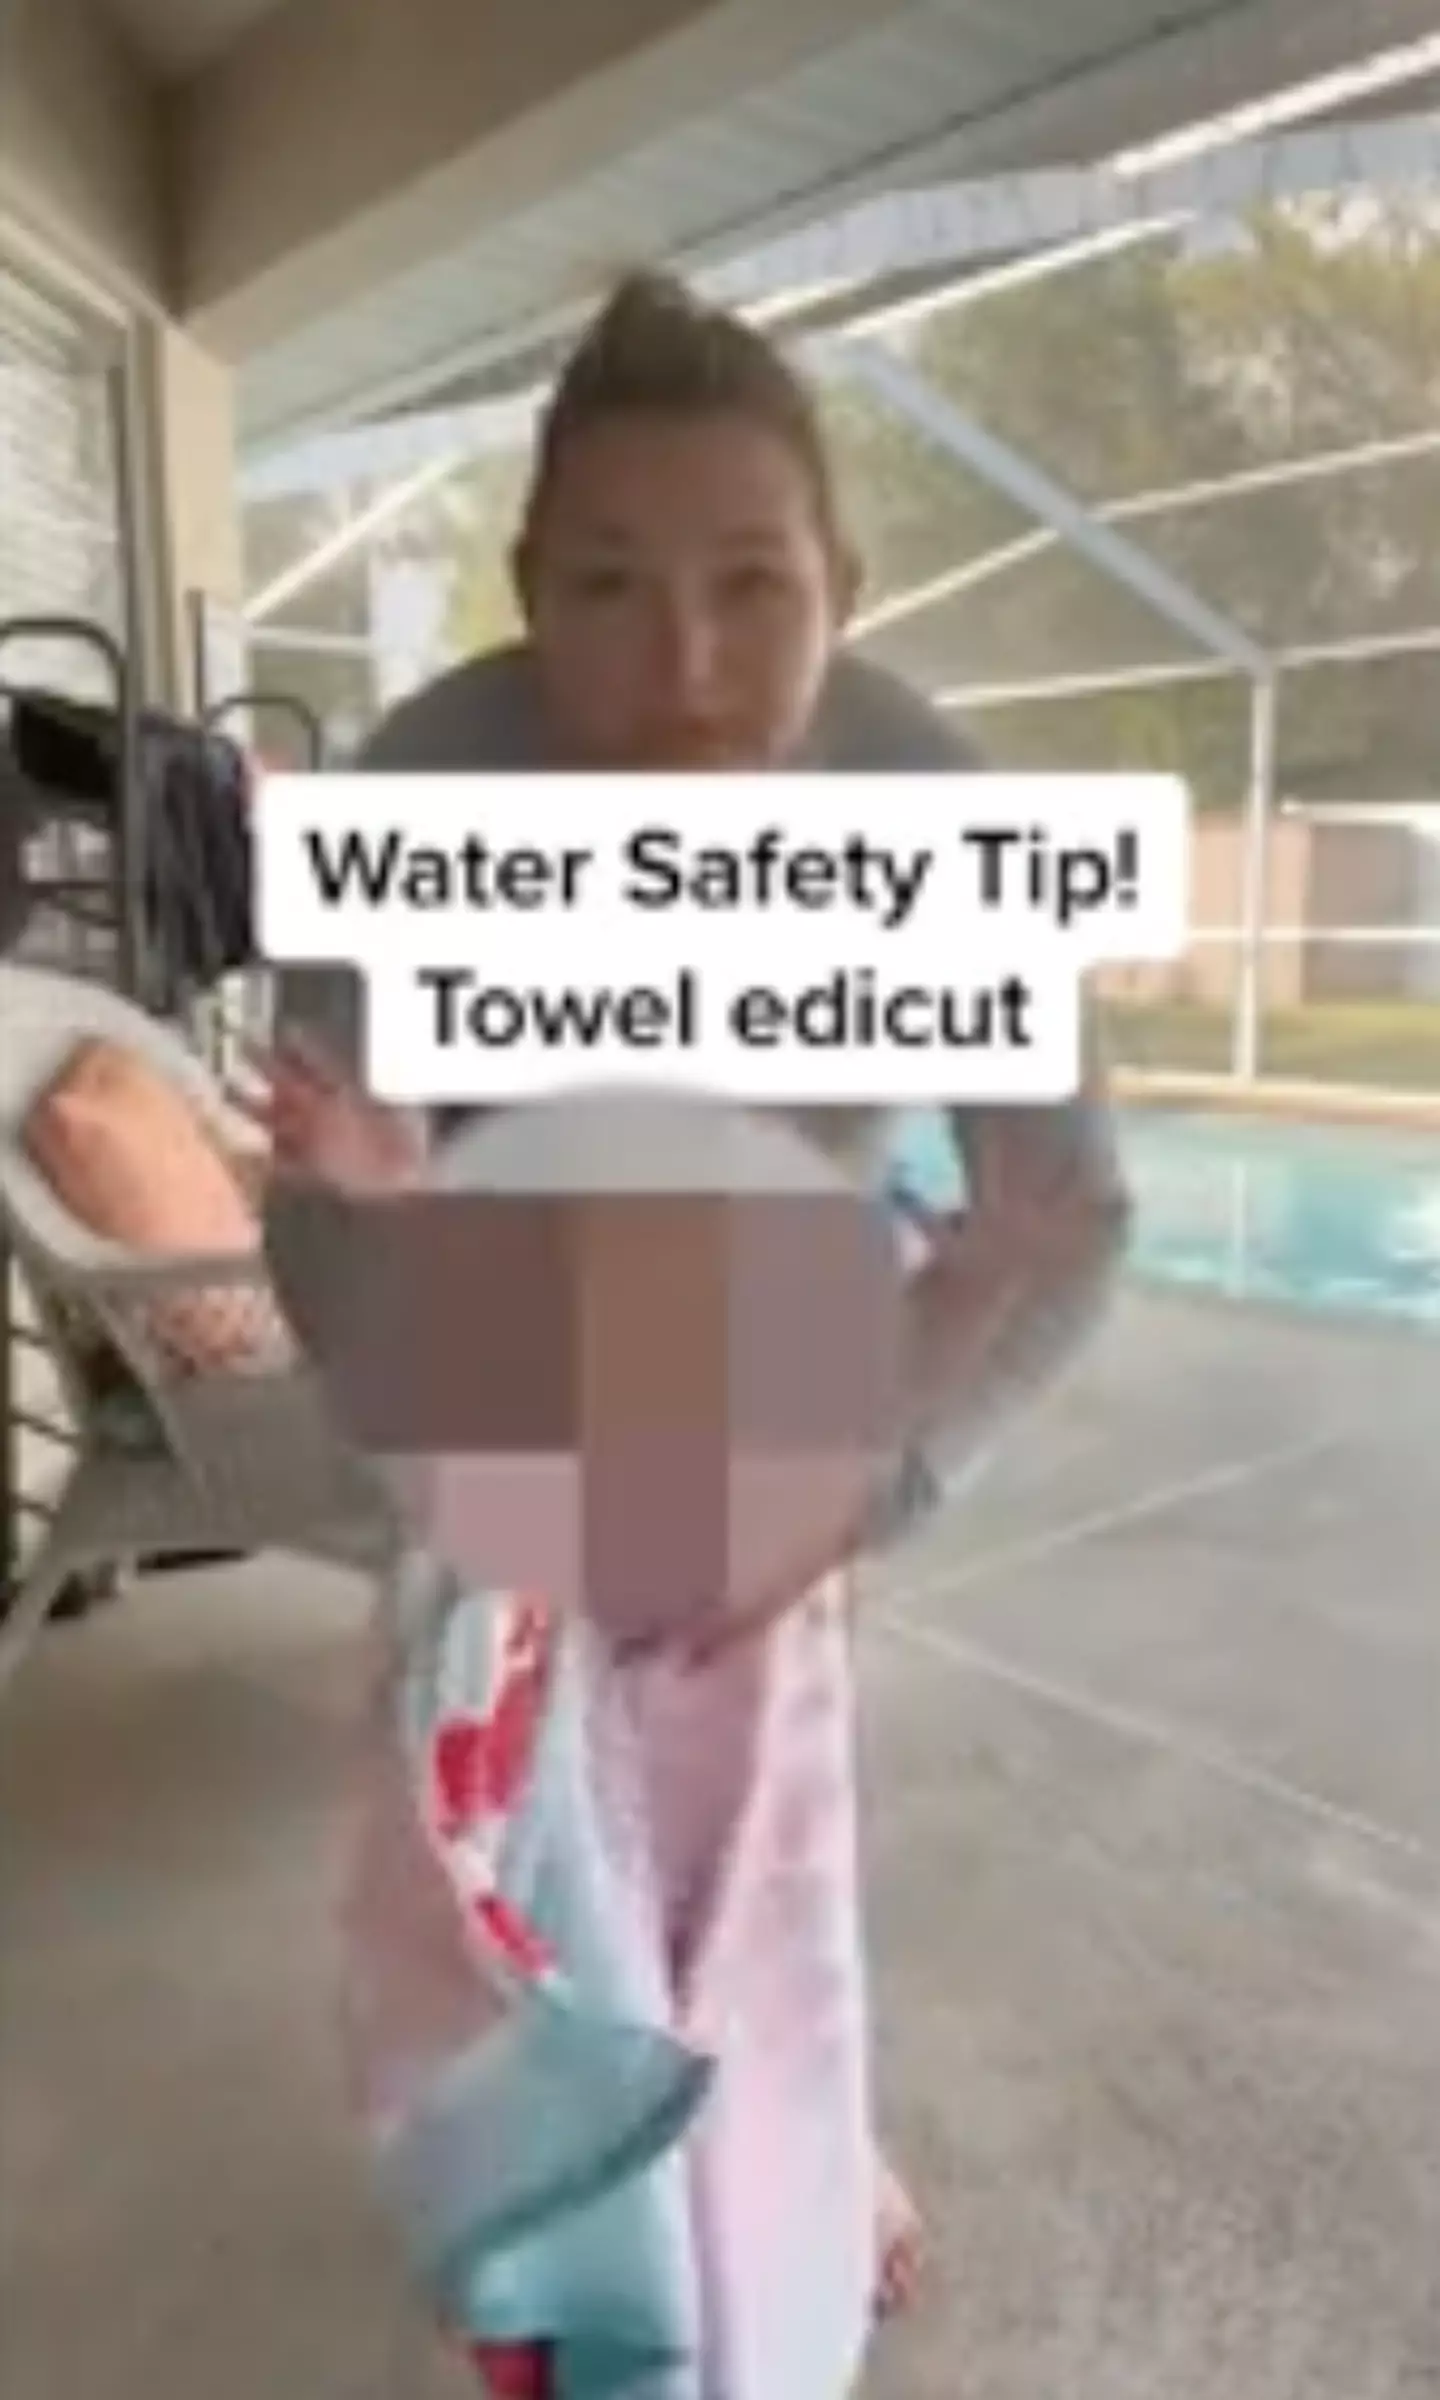 It's safer to put the towel underneath the child's arms.